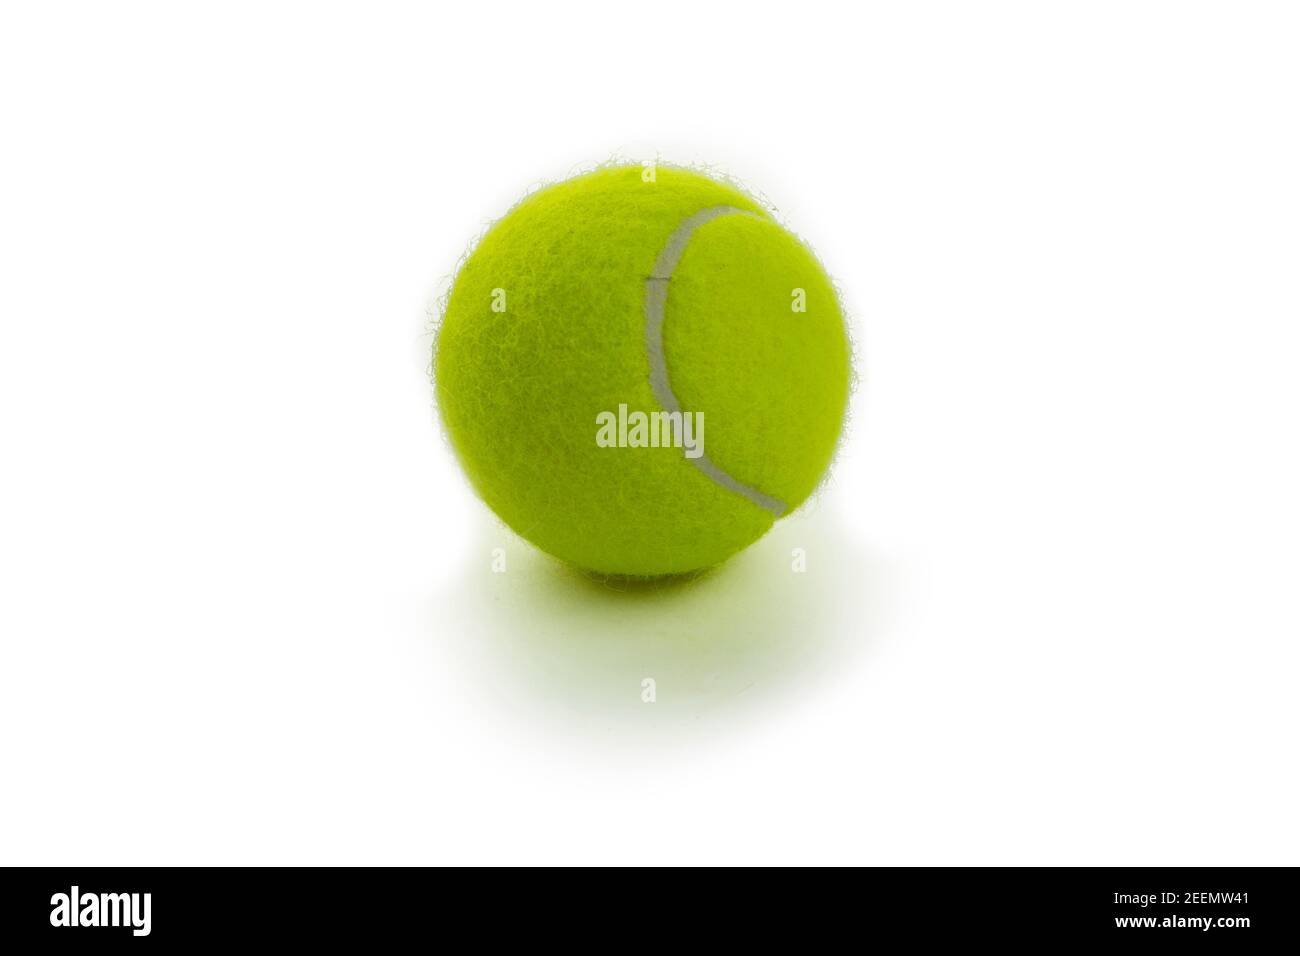 on a white background lies an isolated yellow tennis ball Stock Photo